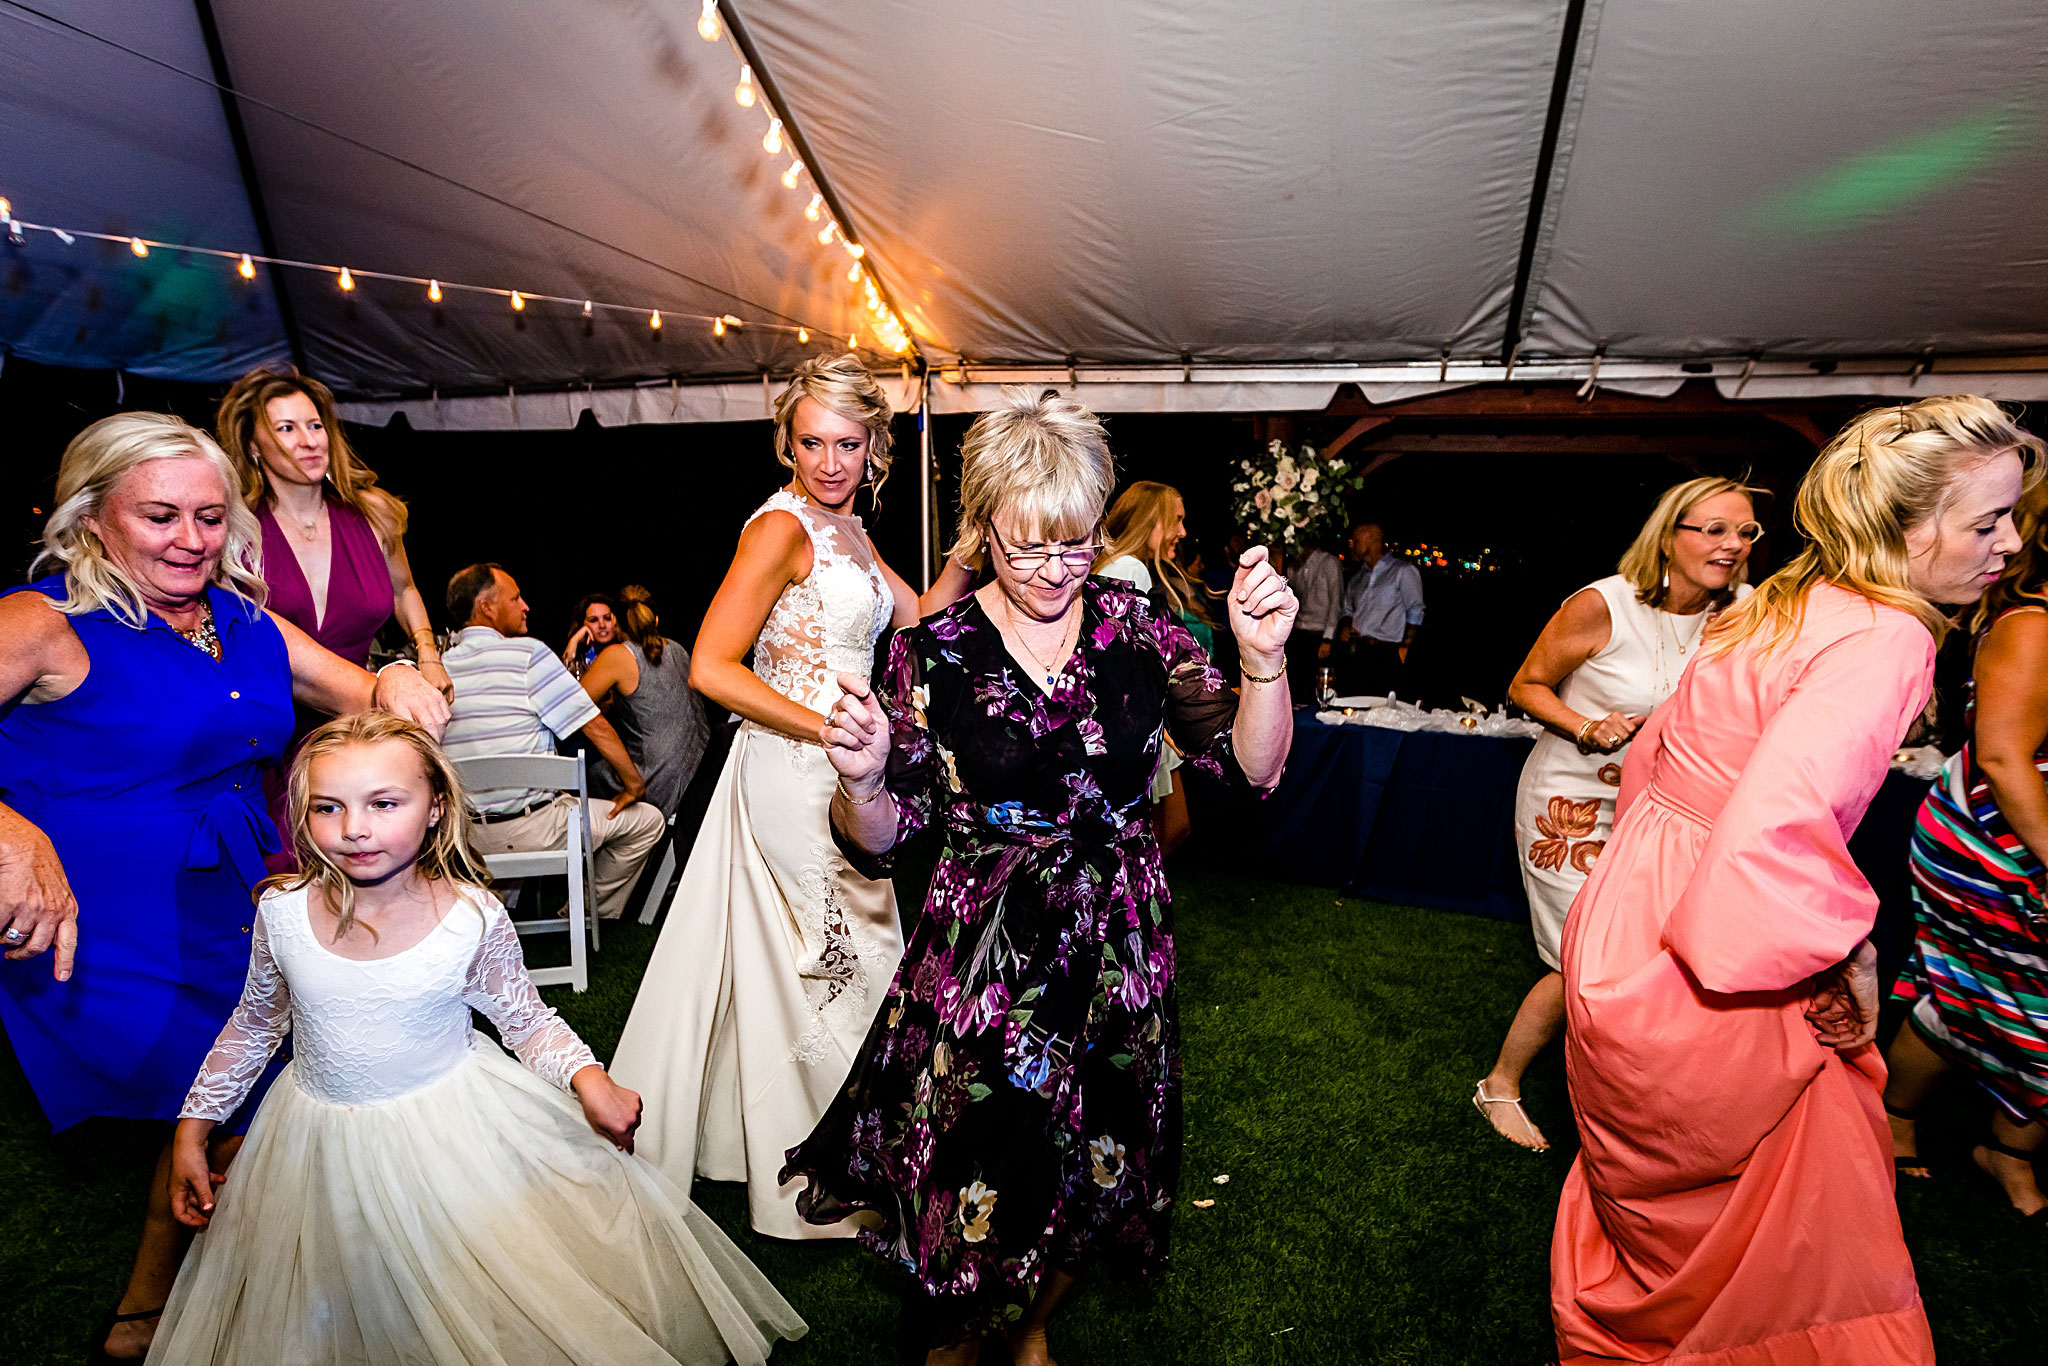 Bride and guests dancing during the reception. Kelli & Jason's golf course wedding at The Ranch Country Club by Colorado Wedding Photographer Jennifer Garza, Small wedding ideas, Intimate wedding, Golf Course Wedding, Country Club Wedding, Summer Wedding, Golf Wedding, Wedding planning, Colorado Wedding Photographer, Colorado Elopement Photographer, Colorado Elopement, Colorado Wedding, Denver Wedding Photographer, Denver Wedding, Wedding Inspiration, Summer Wedding Inspiration, Covid Wedding